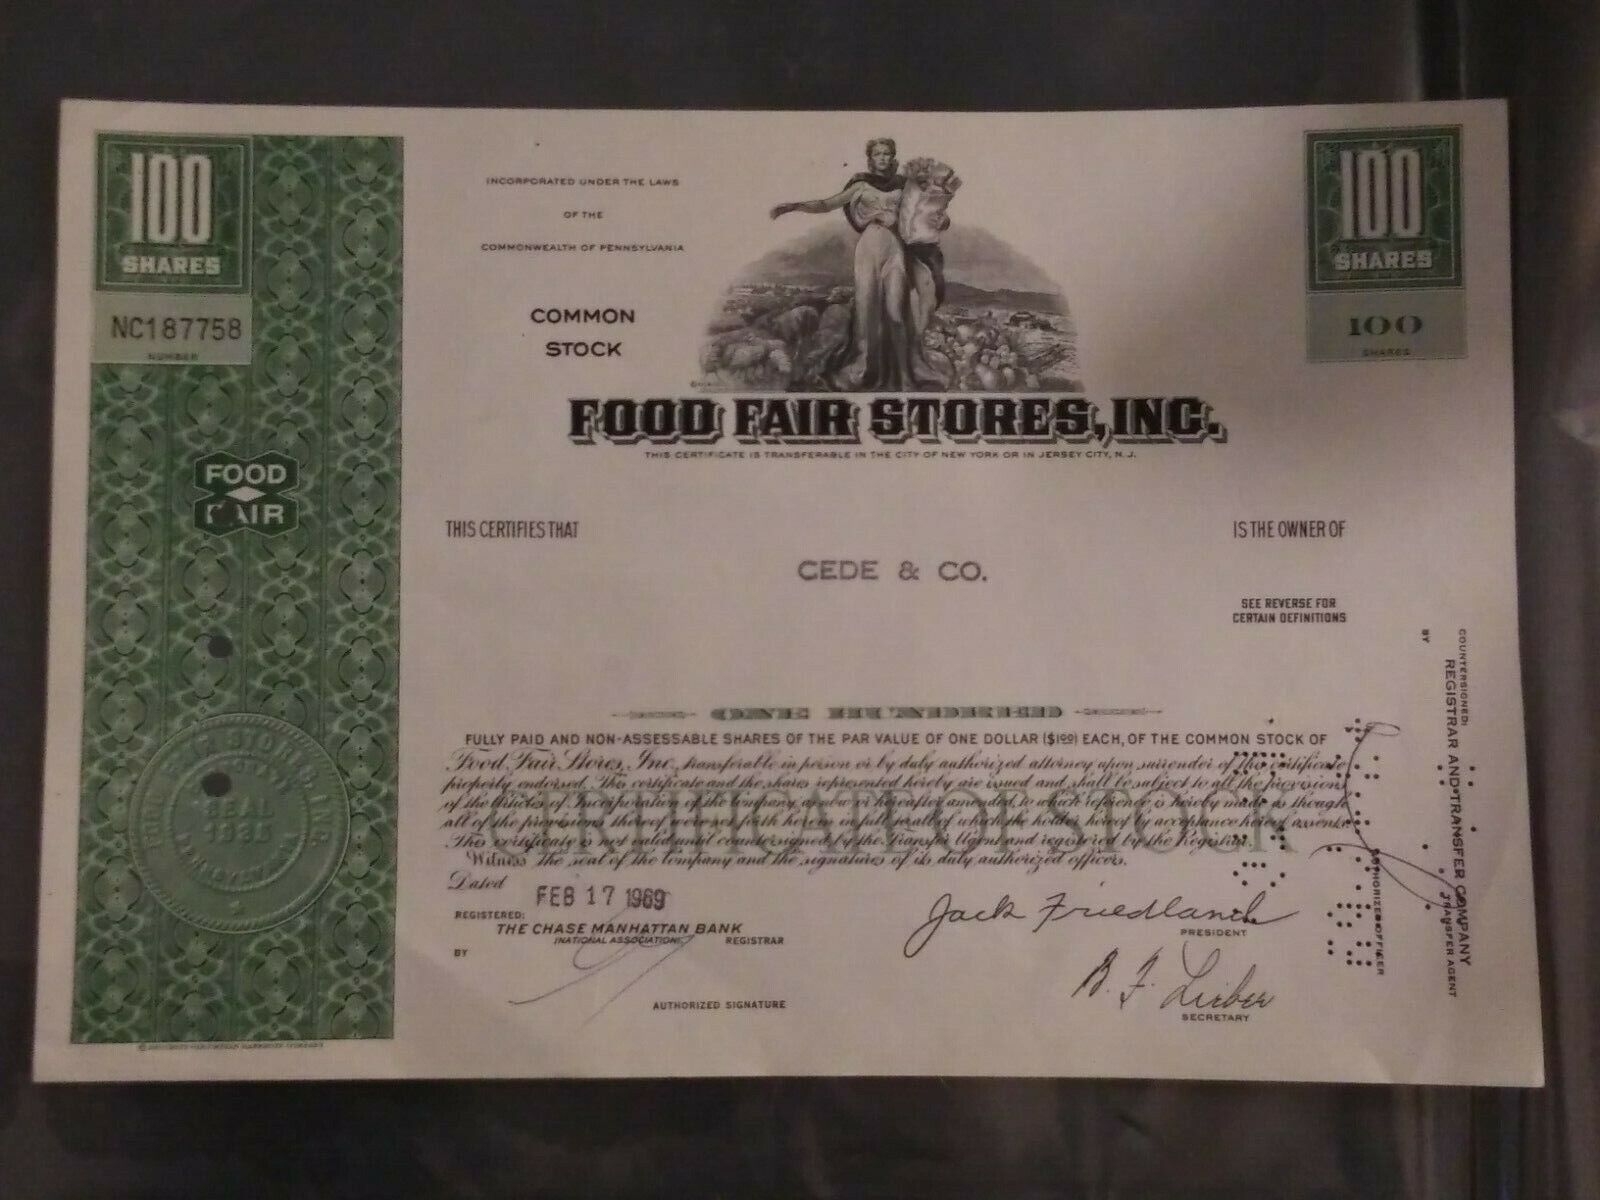 Food Fair Stores Inc. Old 100 Share Stock Certificate